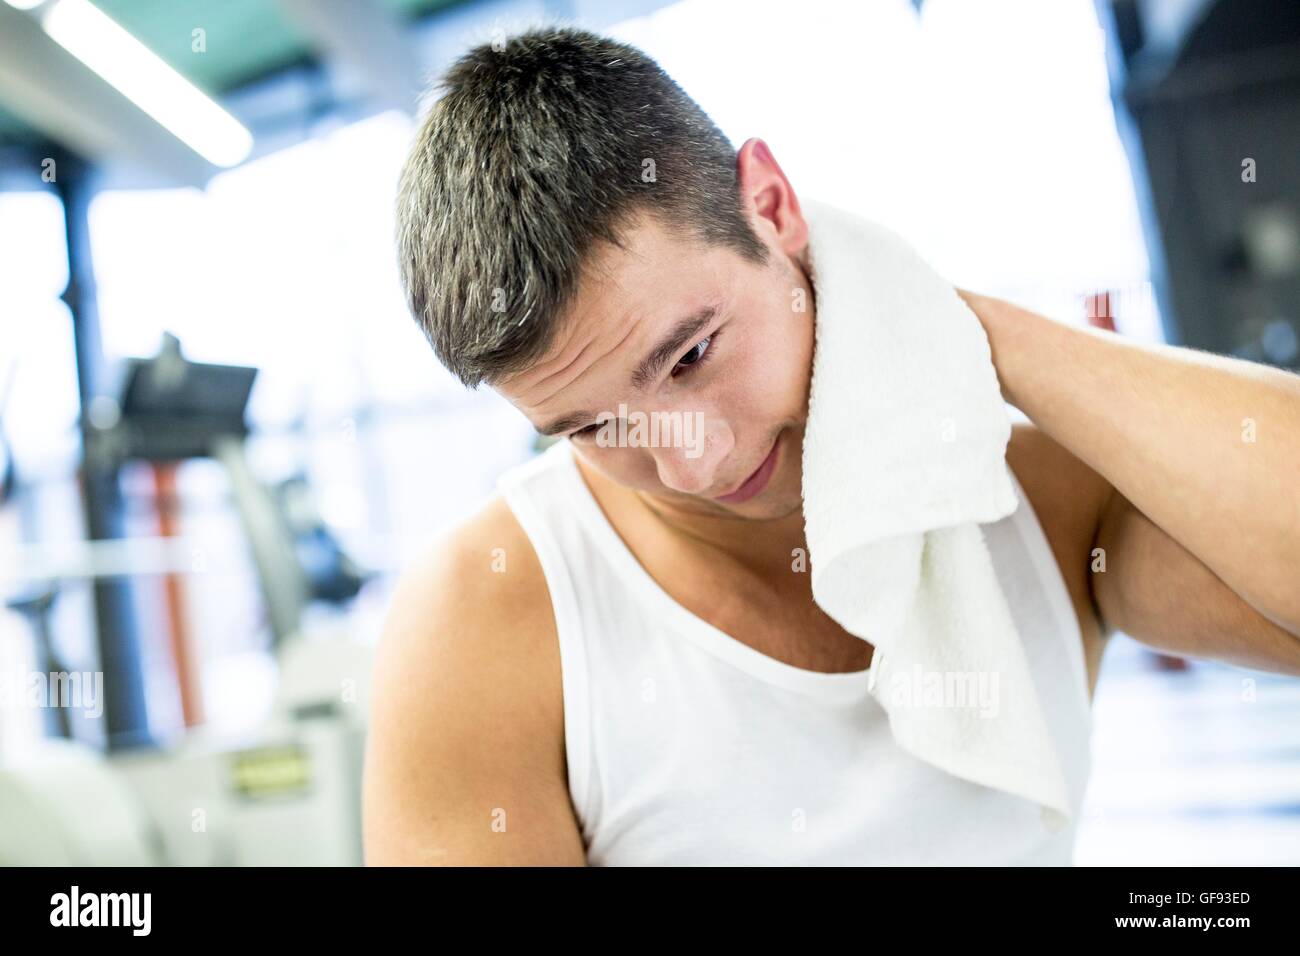 PROPERTY RELEASED. MODEL RELEASED. Young man wiping his sweat with towel after exercising in gym. Stock Photo